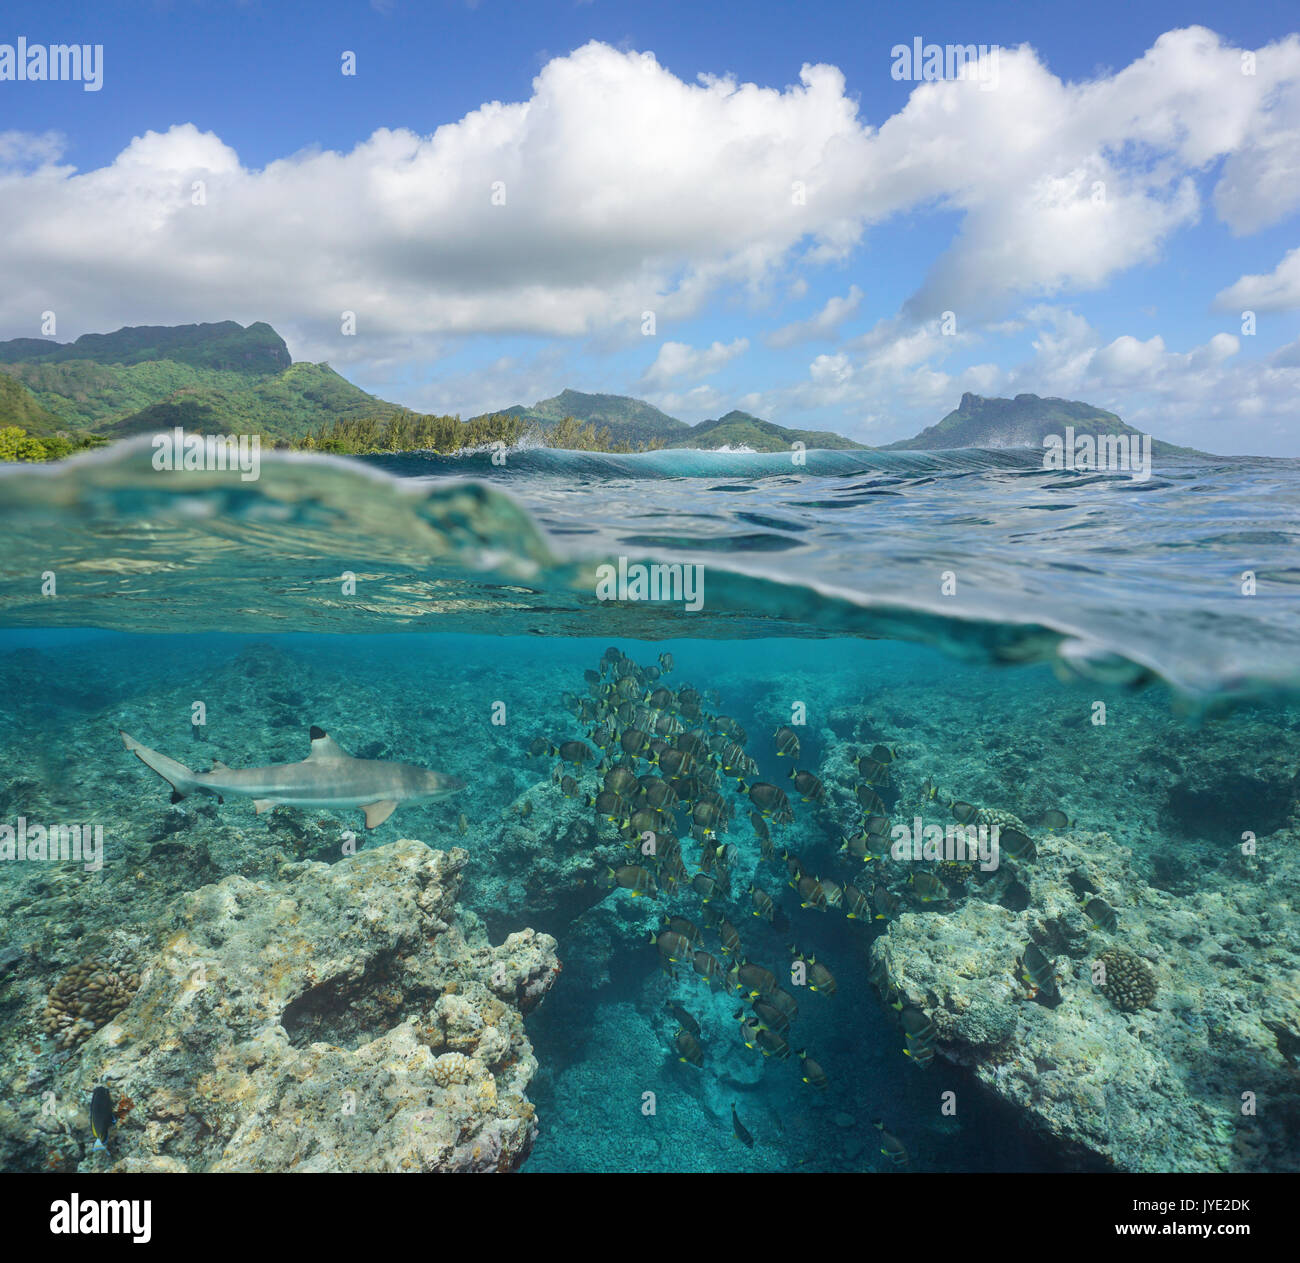 Over and under sea surface, school of fish with a shark underwater and wave breaking on the reef, Huahine island, Pacific ocean, French Polynesia Stock Photo